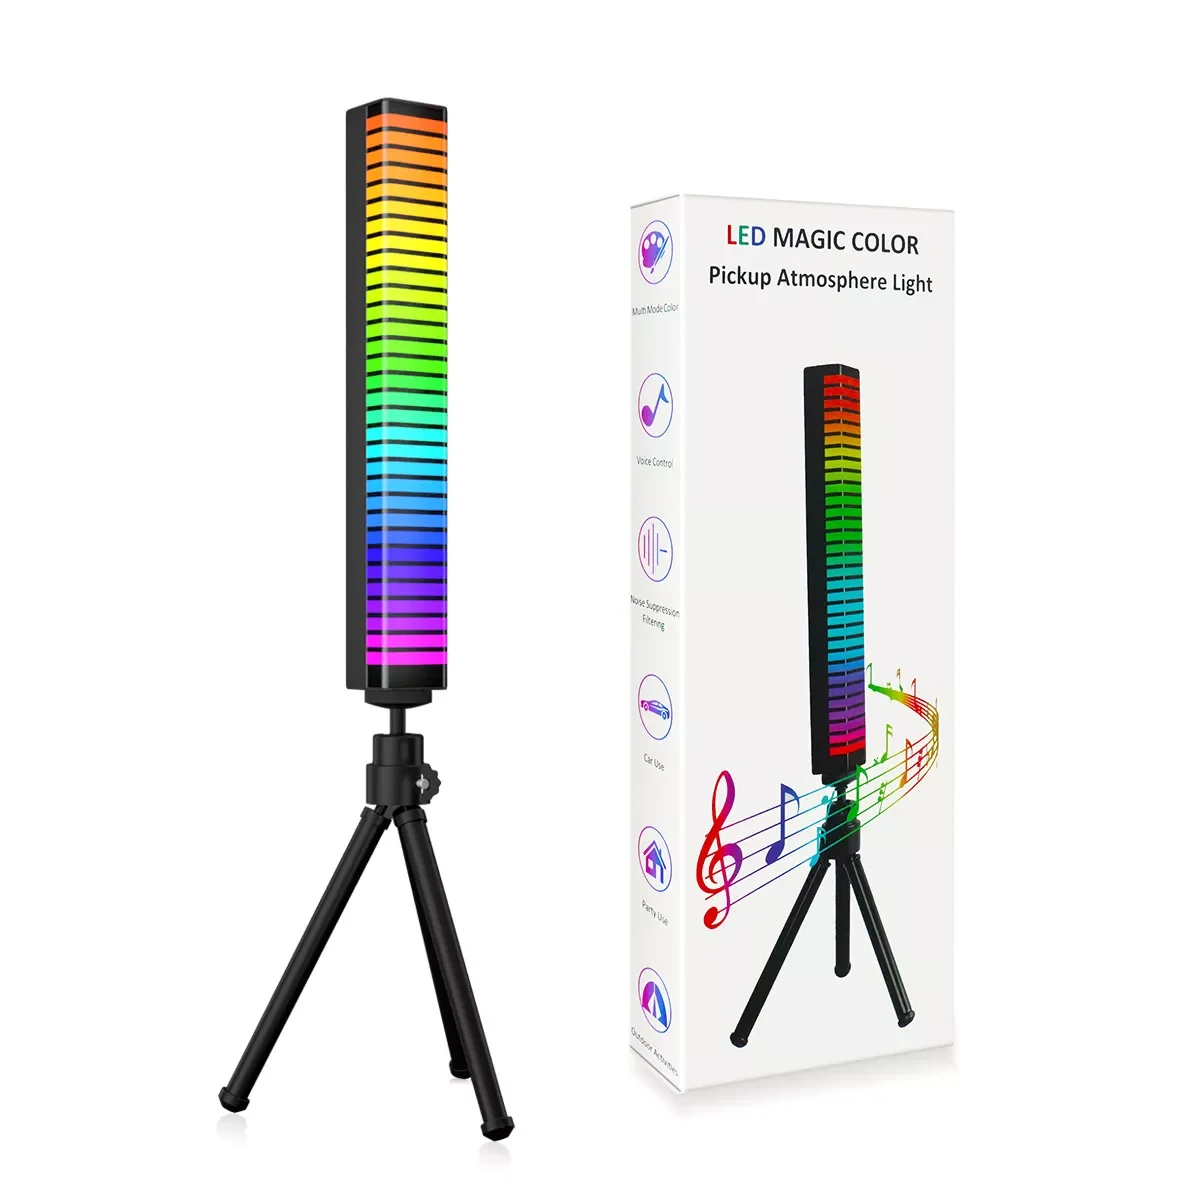 APP Sound Control Light RGB Pickup Voice Activated Rhythm Lights Music Color Ambient LED Lamp Atmospher Night Light Chargable